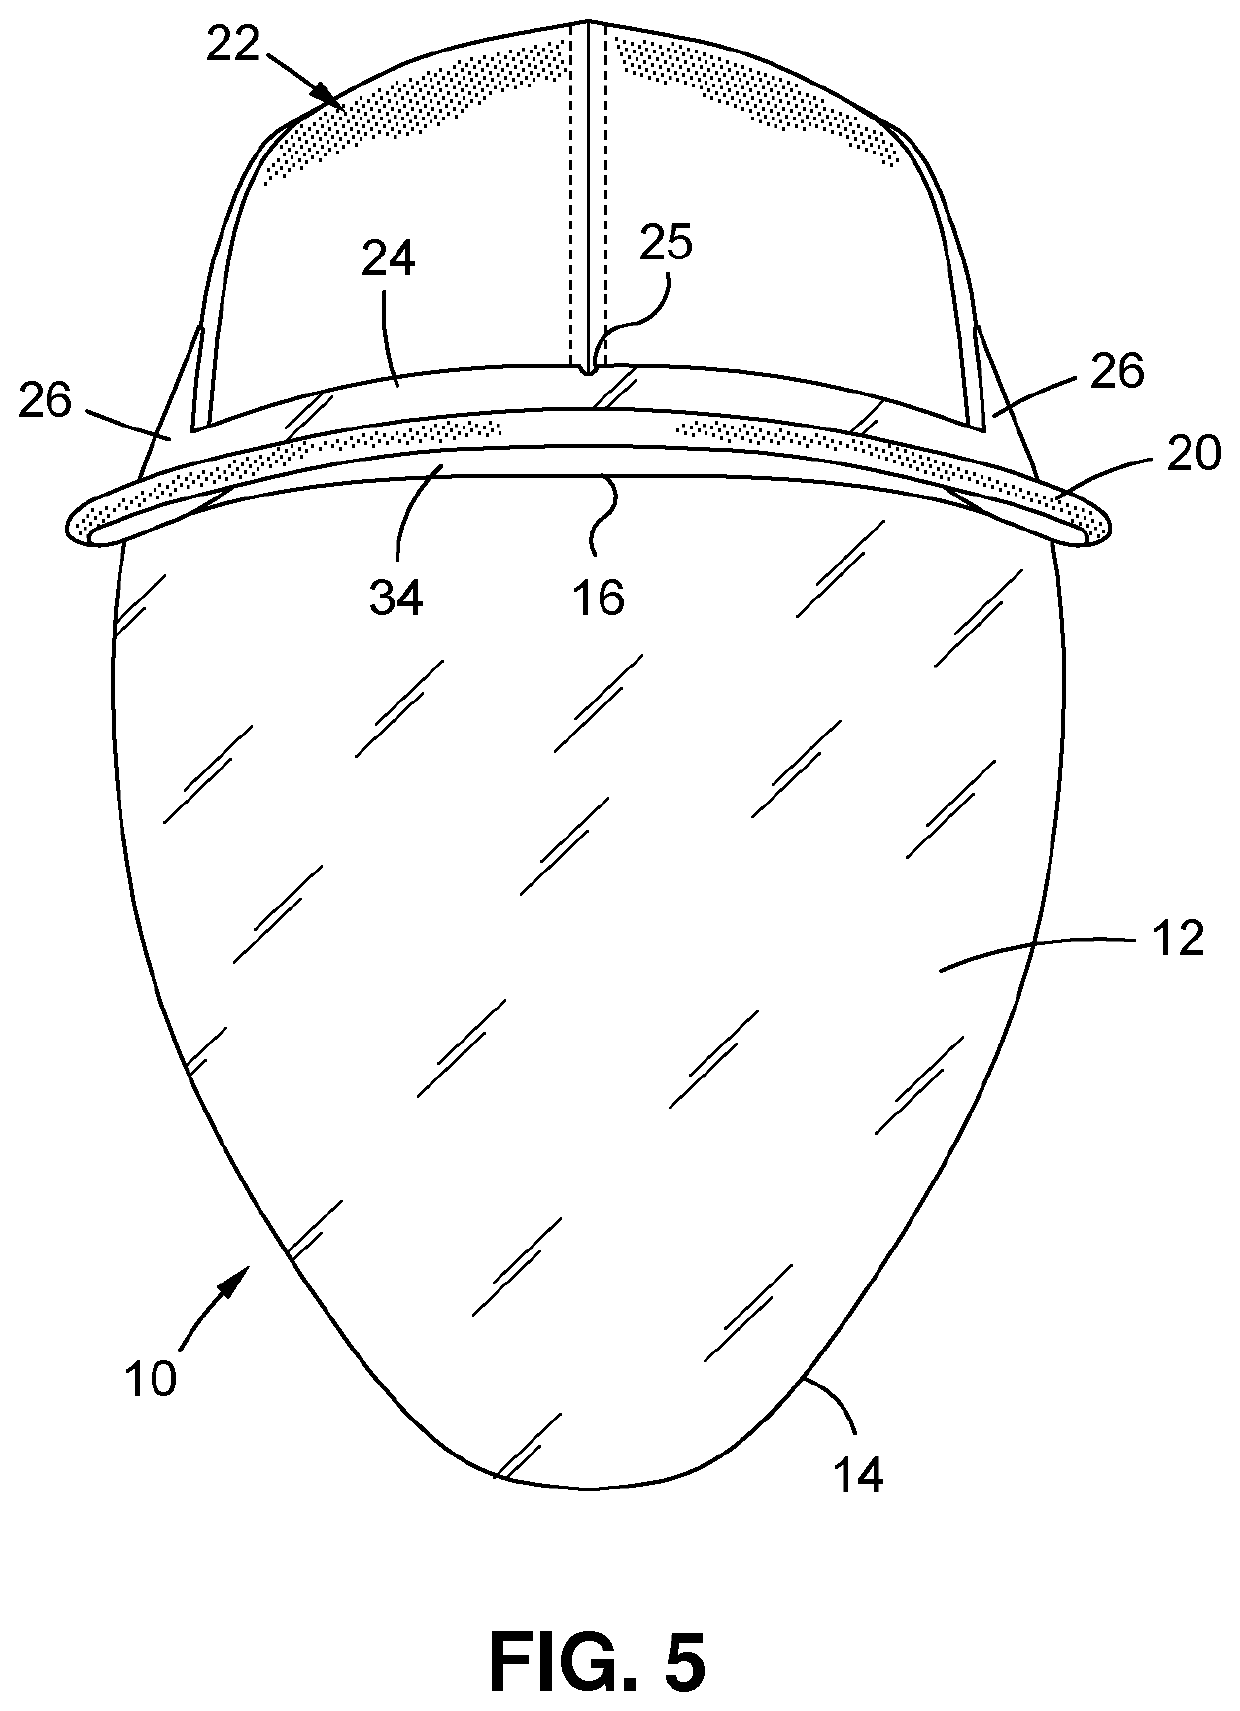 Protective face shield attachable to headwear